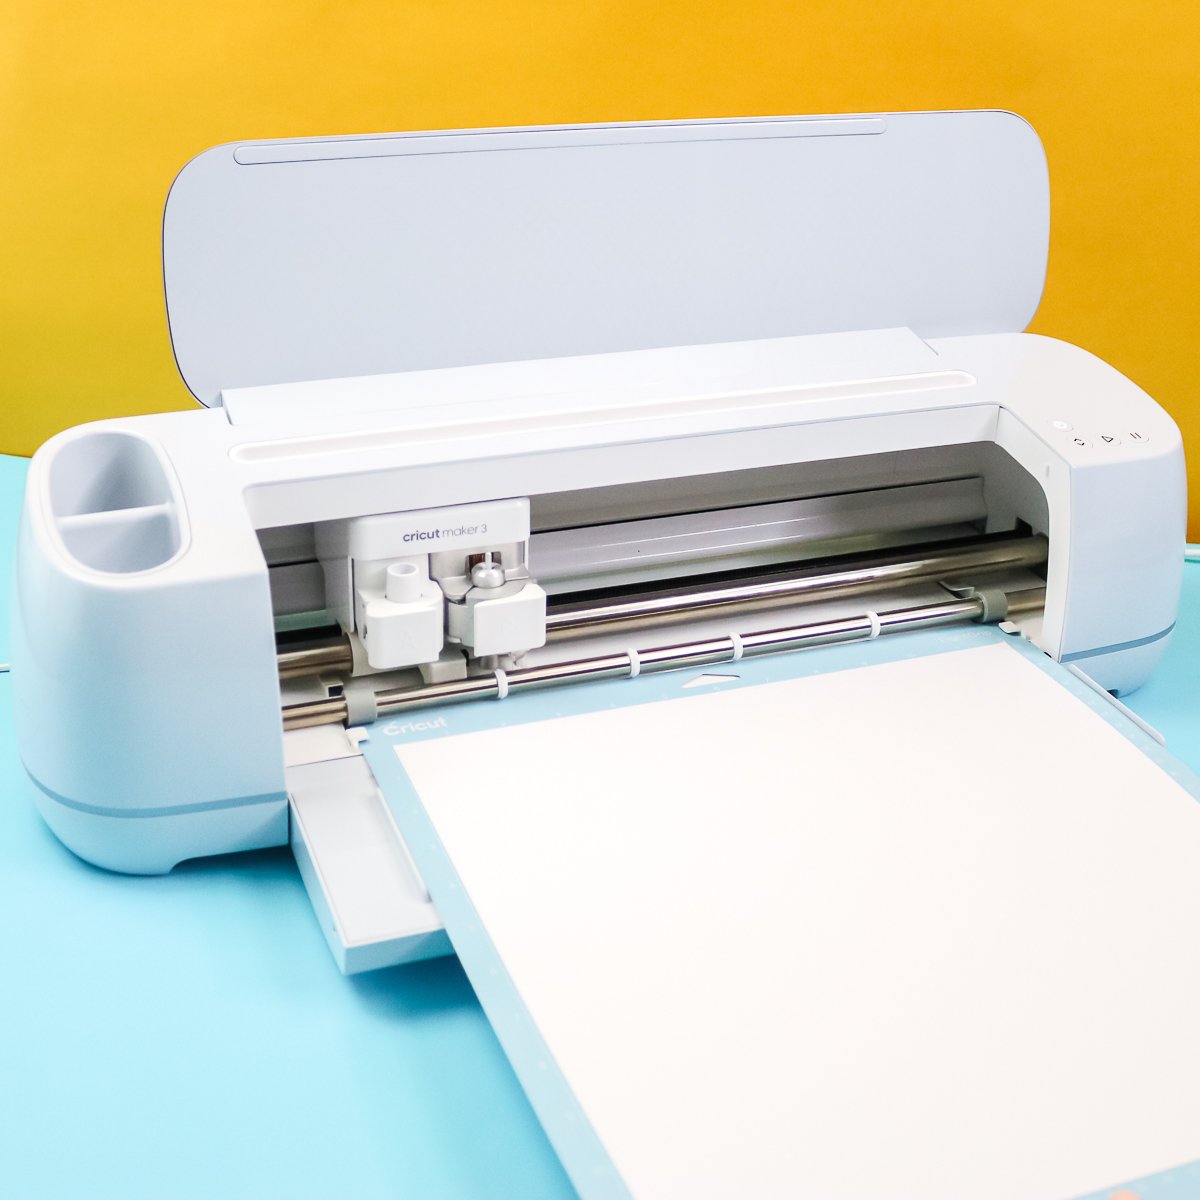 How to Make Long Cuts with Cricut Maker 3 